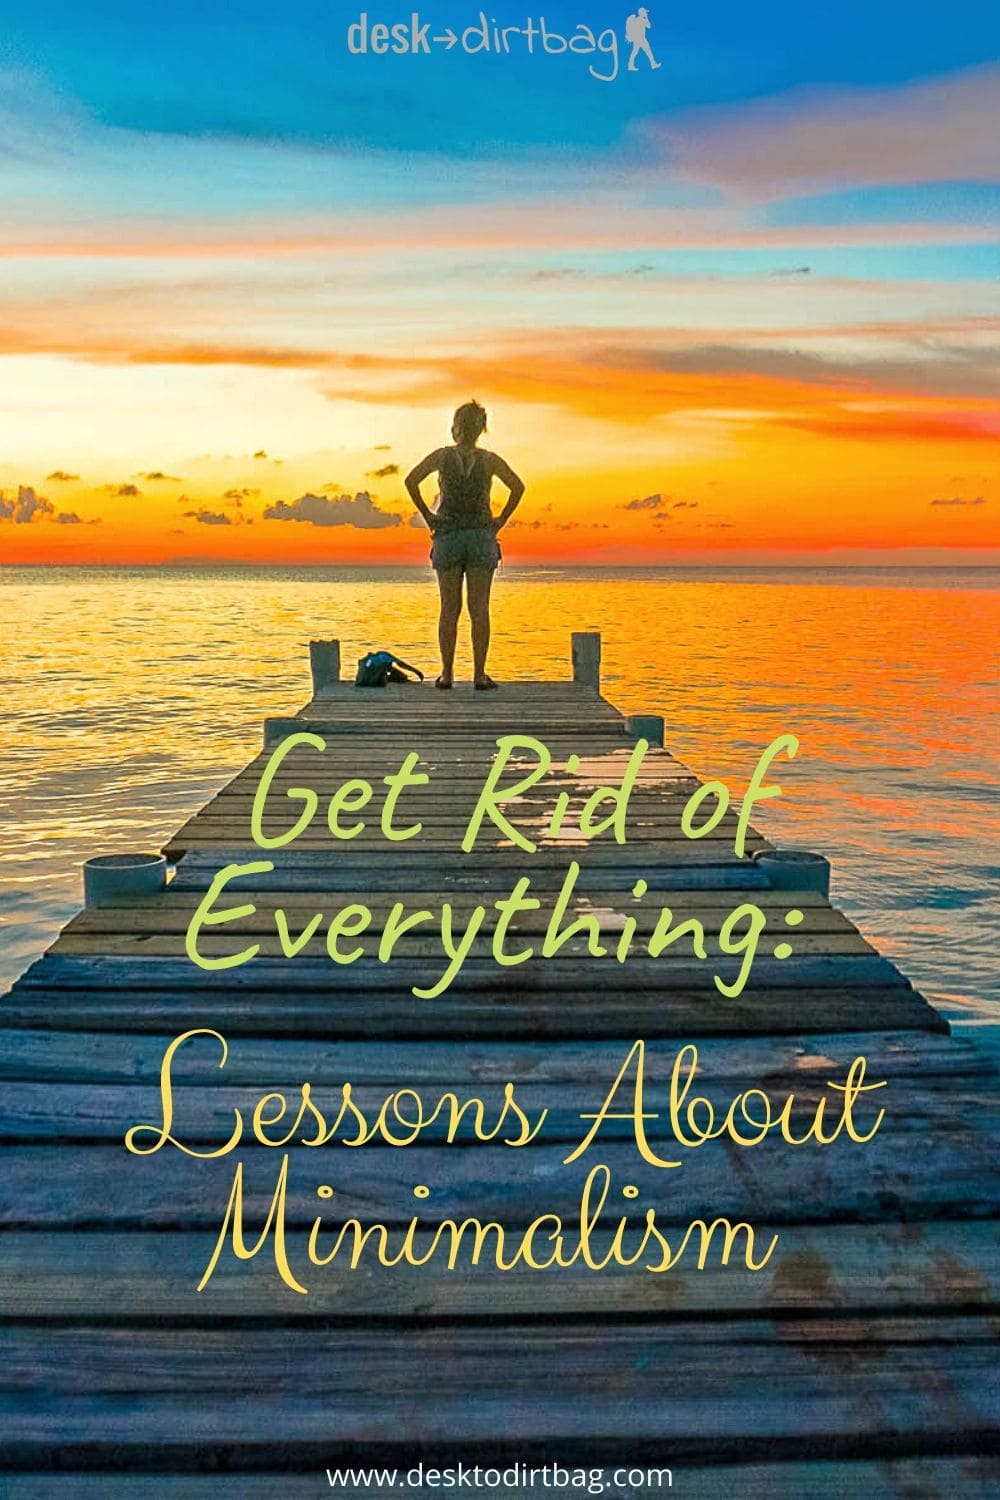 Get Rid of Everything: Expensive Lessons Embracing Minimalism guest-post